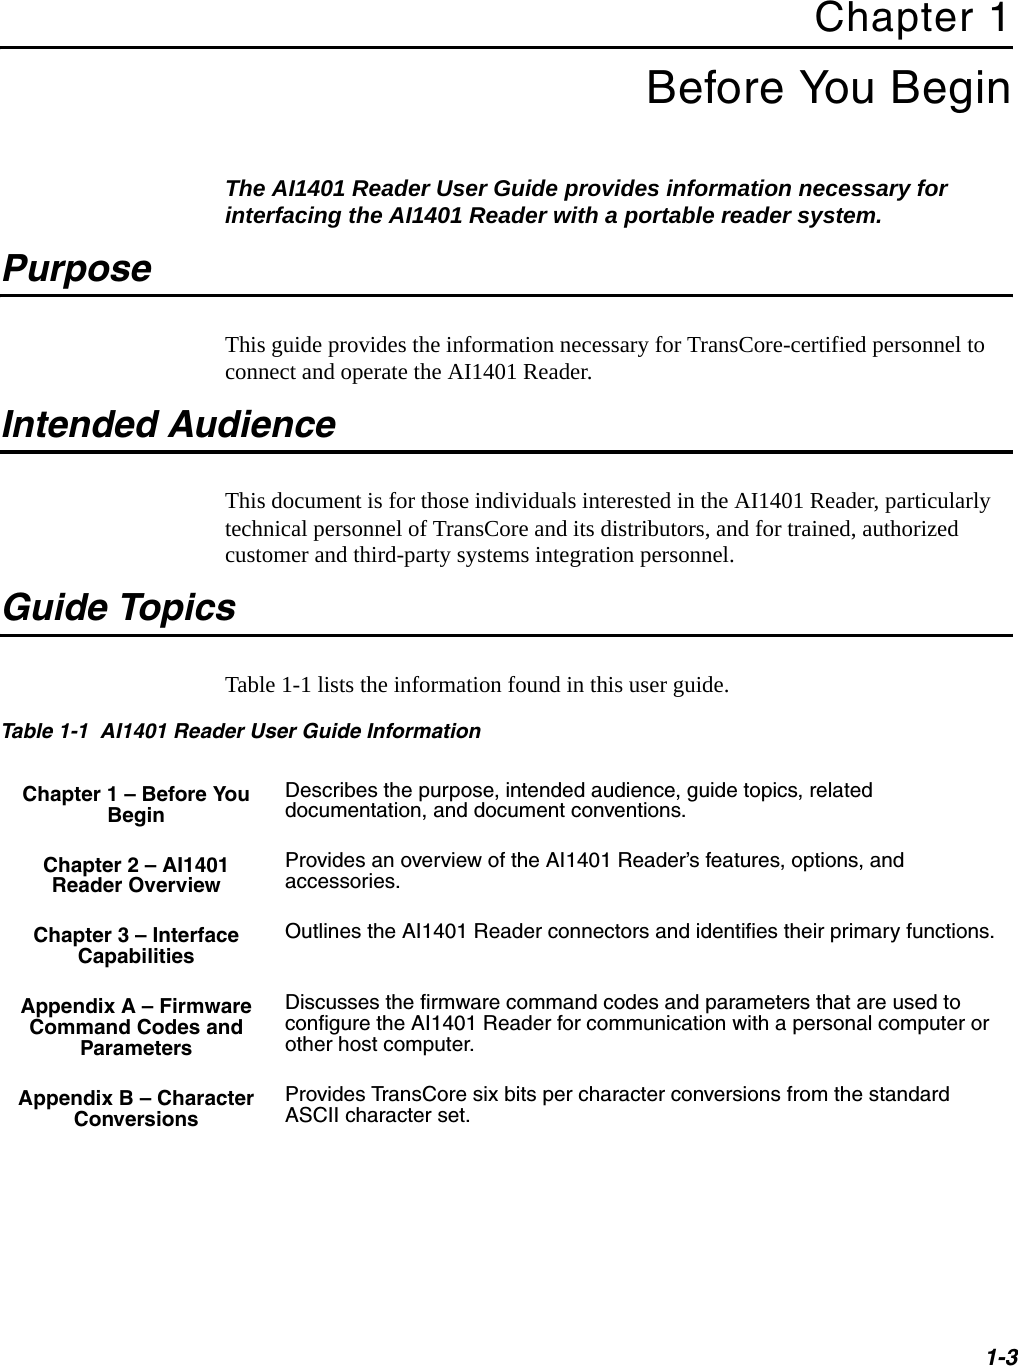 1-3Chapter 1Before You BeginThe AI1401 Reader User Guide provides information necessary for interfacing the AI1401 Reader with a portable reader system.PurposeThis guide provides the information necessary for TransCore-certified personnel to connect and operate the AI1401 Reader.Intended AudienceThis document is for those individuals interested in the AI1401 Reader, particularly technical personnel of TransCore and its distributors, and for trained, authorized customer and third-party systems integration personnel.Guide TopicsTable 1-1 lists the information found in this user guide.Table 1-1  AI1401 Reader User Guide InformationChapter 1 – Before You BeginDescribes the purpose, intended audience, guide topics, related documentation, and document conventions.Chapter 2 – AI1401 Reader OverviewProvides an overview of the AI1401 Reader’s features, options, and accessories.Chapter 3 – Interface CapabilitiesOutlines the AI1401 Reader connectors and identifies their primary functions.Appendix A – Firmware Command Codes and ParametersDiscusses the firmware command codes and parameters that are used to configure the AI1401 Reader for communication with a personal computer or other host computer.Appendix B – Character ConversionsProvides TransCore six bits per character conversions from the standard ASCII character set.